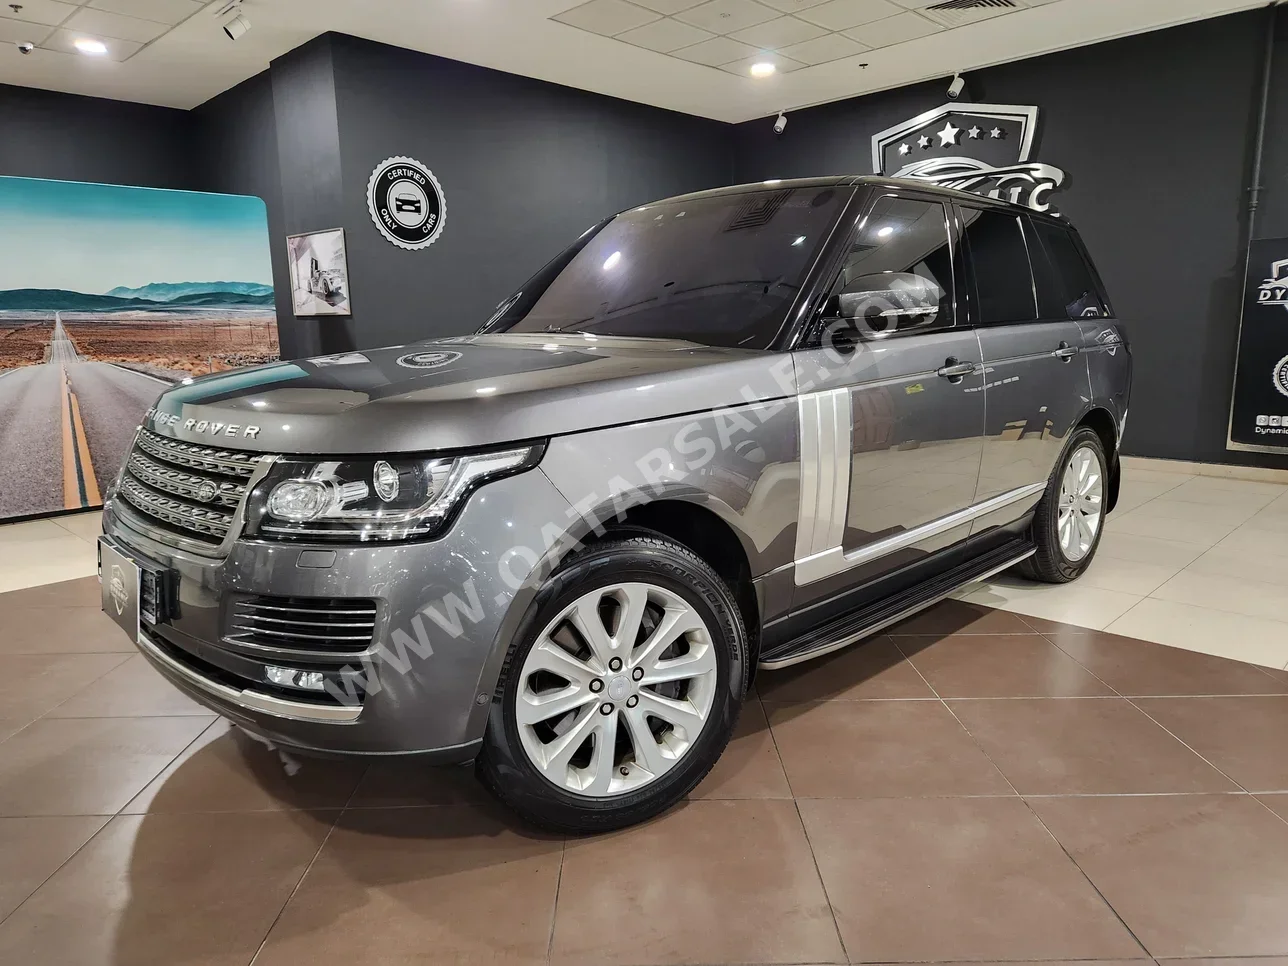 Land Rover  Range Rover  Vogue  2017  Automatic  66,000 Km  6 Cylinder  Four Wheel Drive (4WD)  SUV  Gray  With Warranty